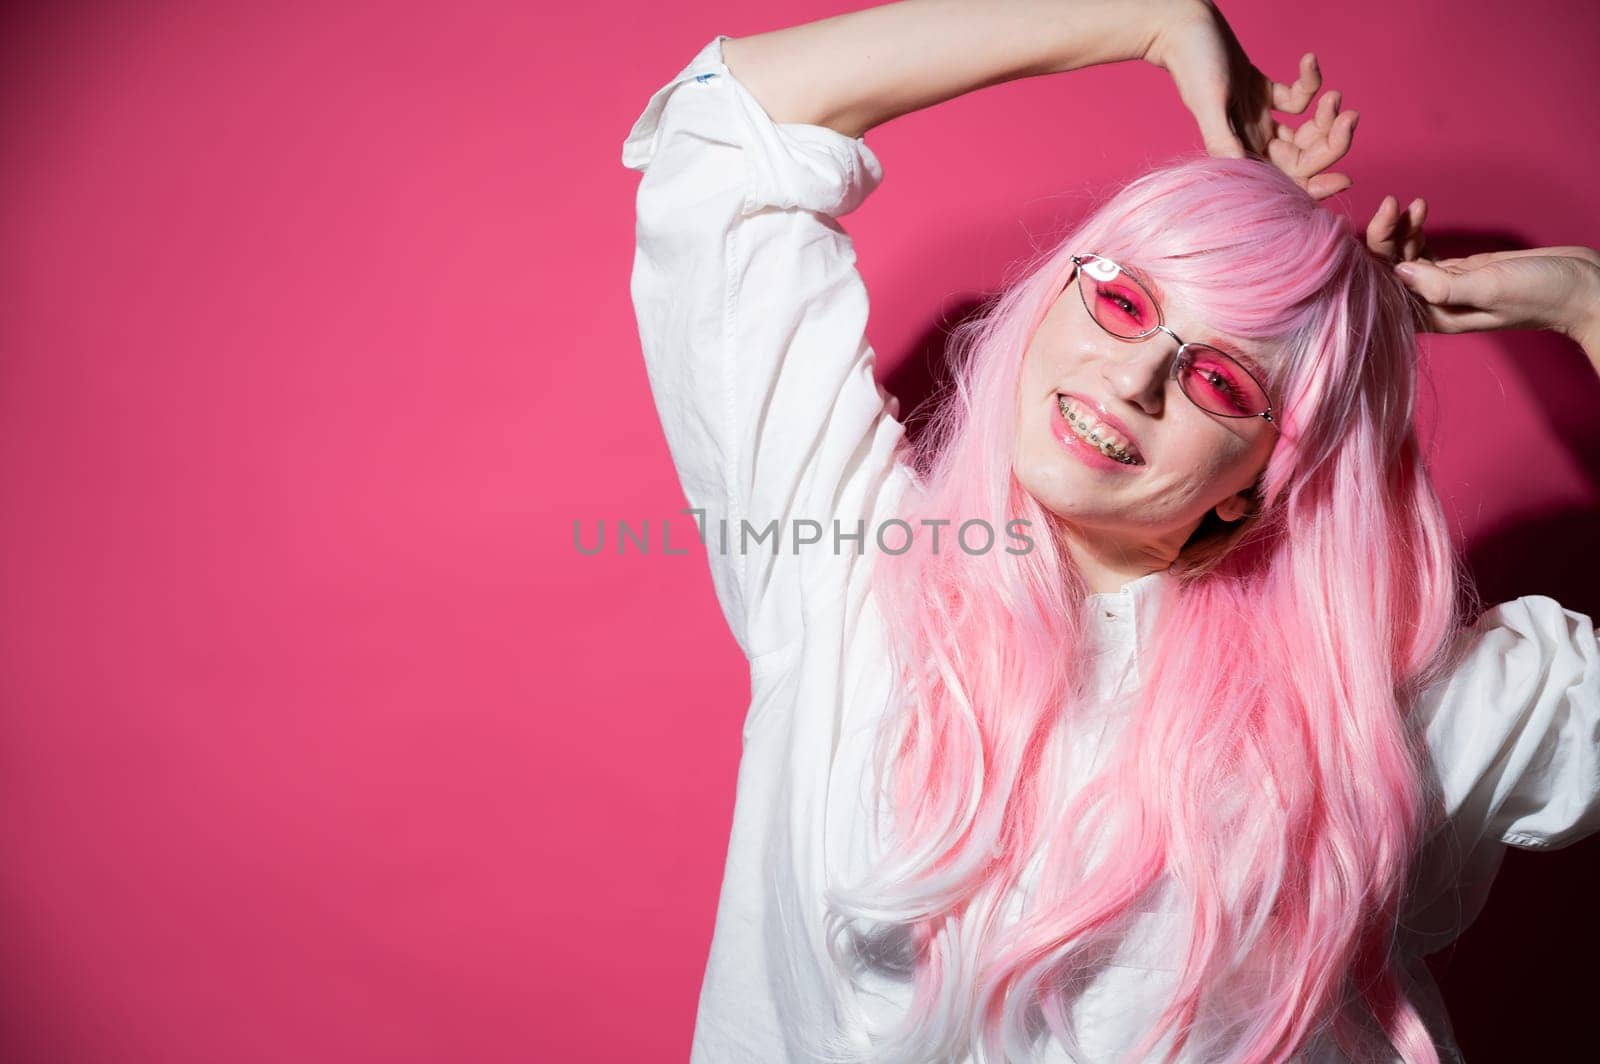 Close-up portrait of a young woman with braces in a pink wig and sunglasses on a pink background. Copy space. by mrwed54